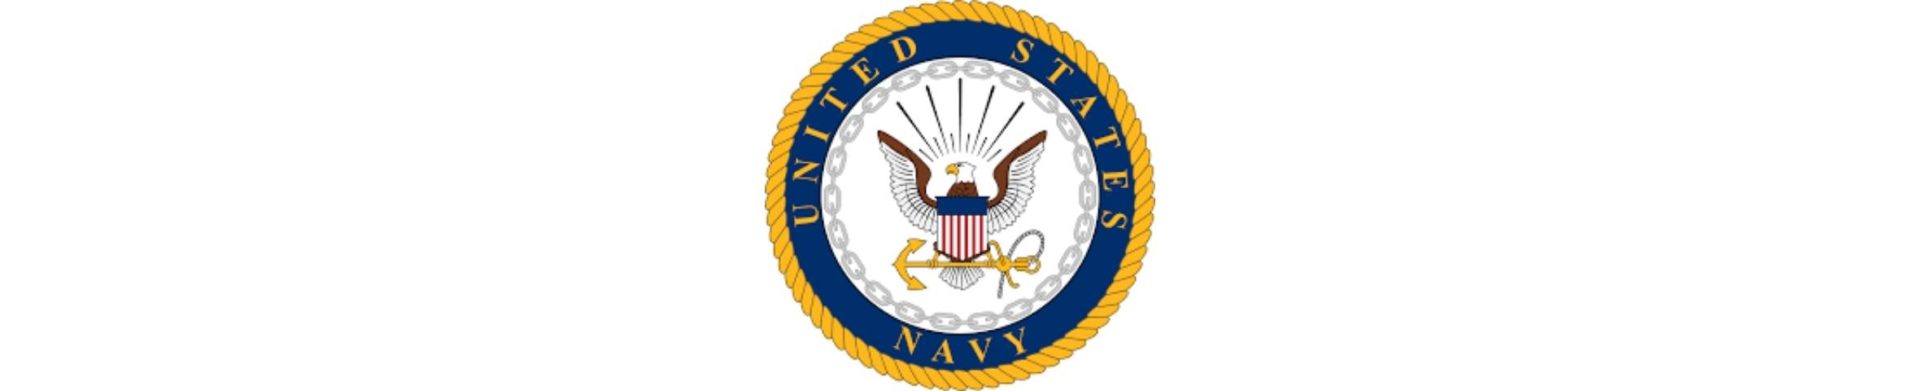 US Navy logo with stylized eagle in center